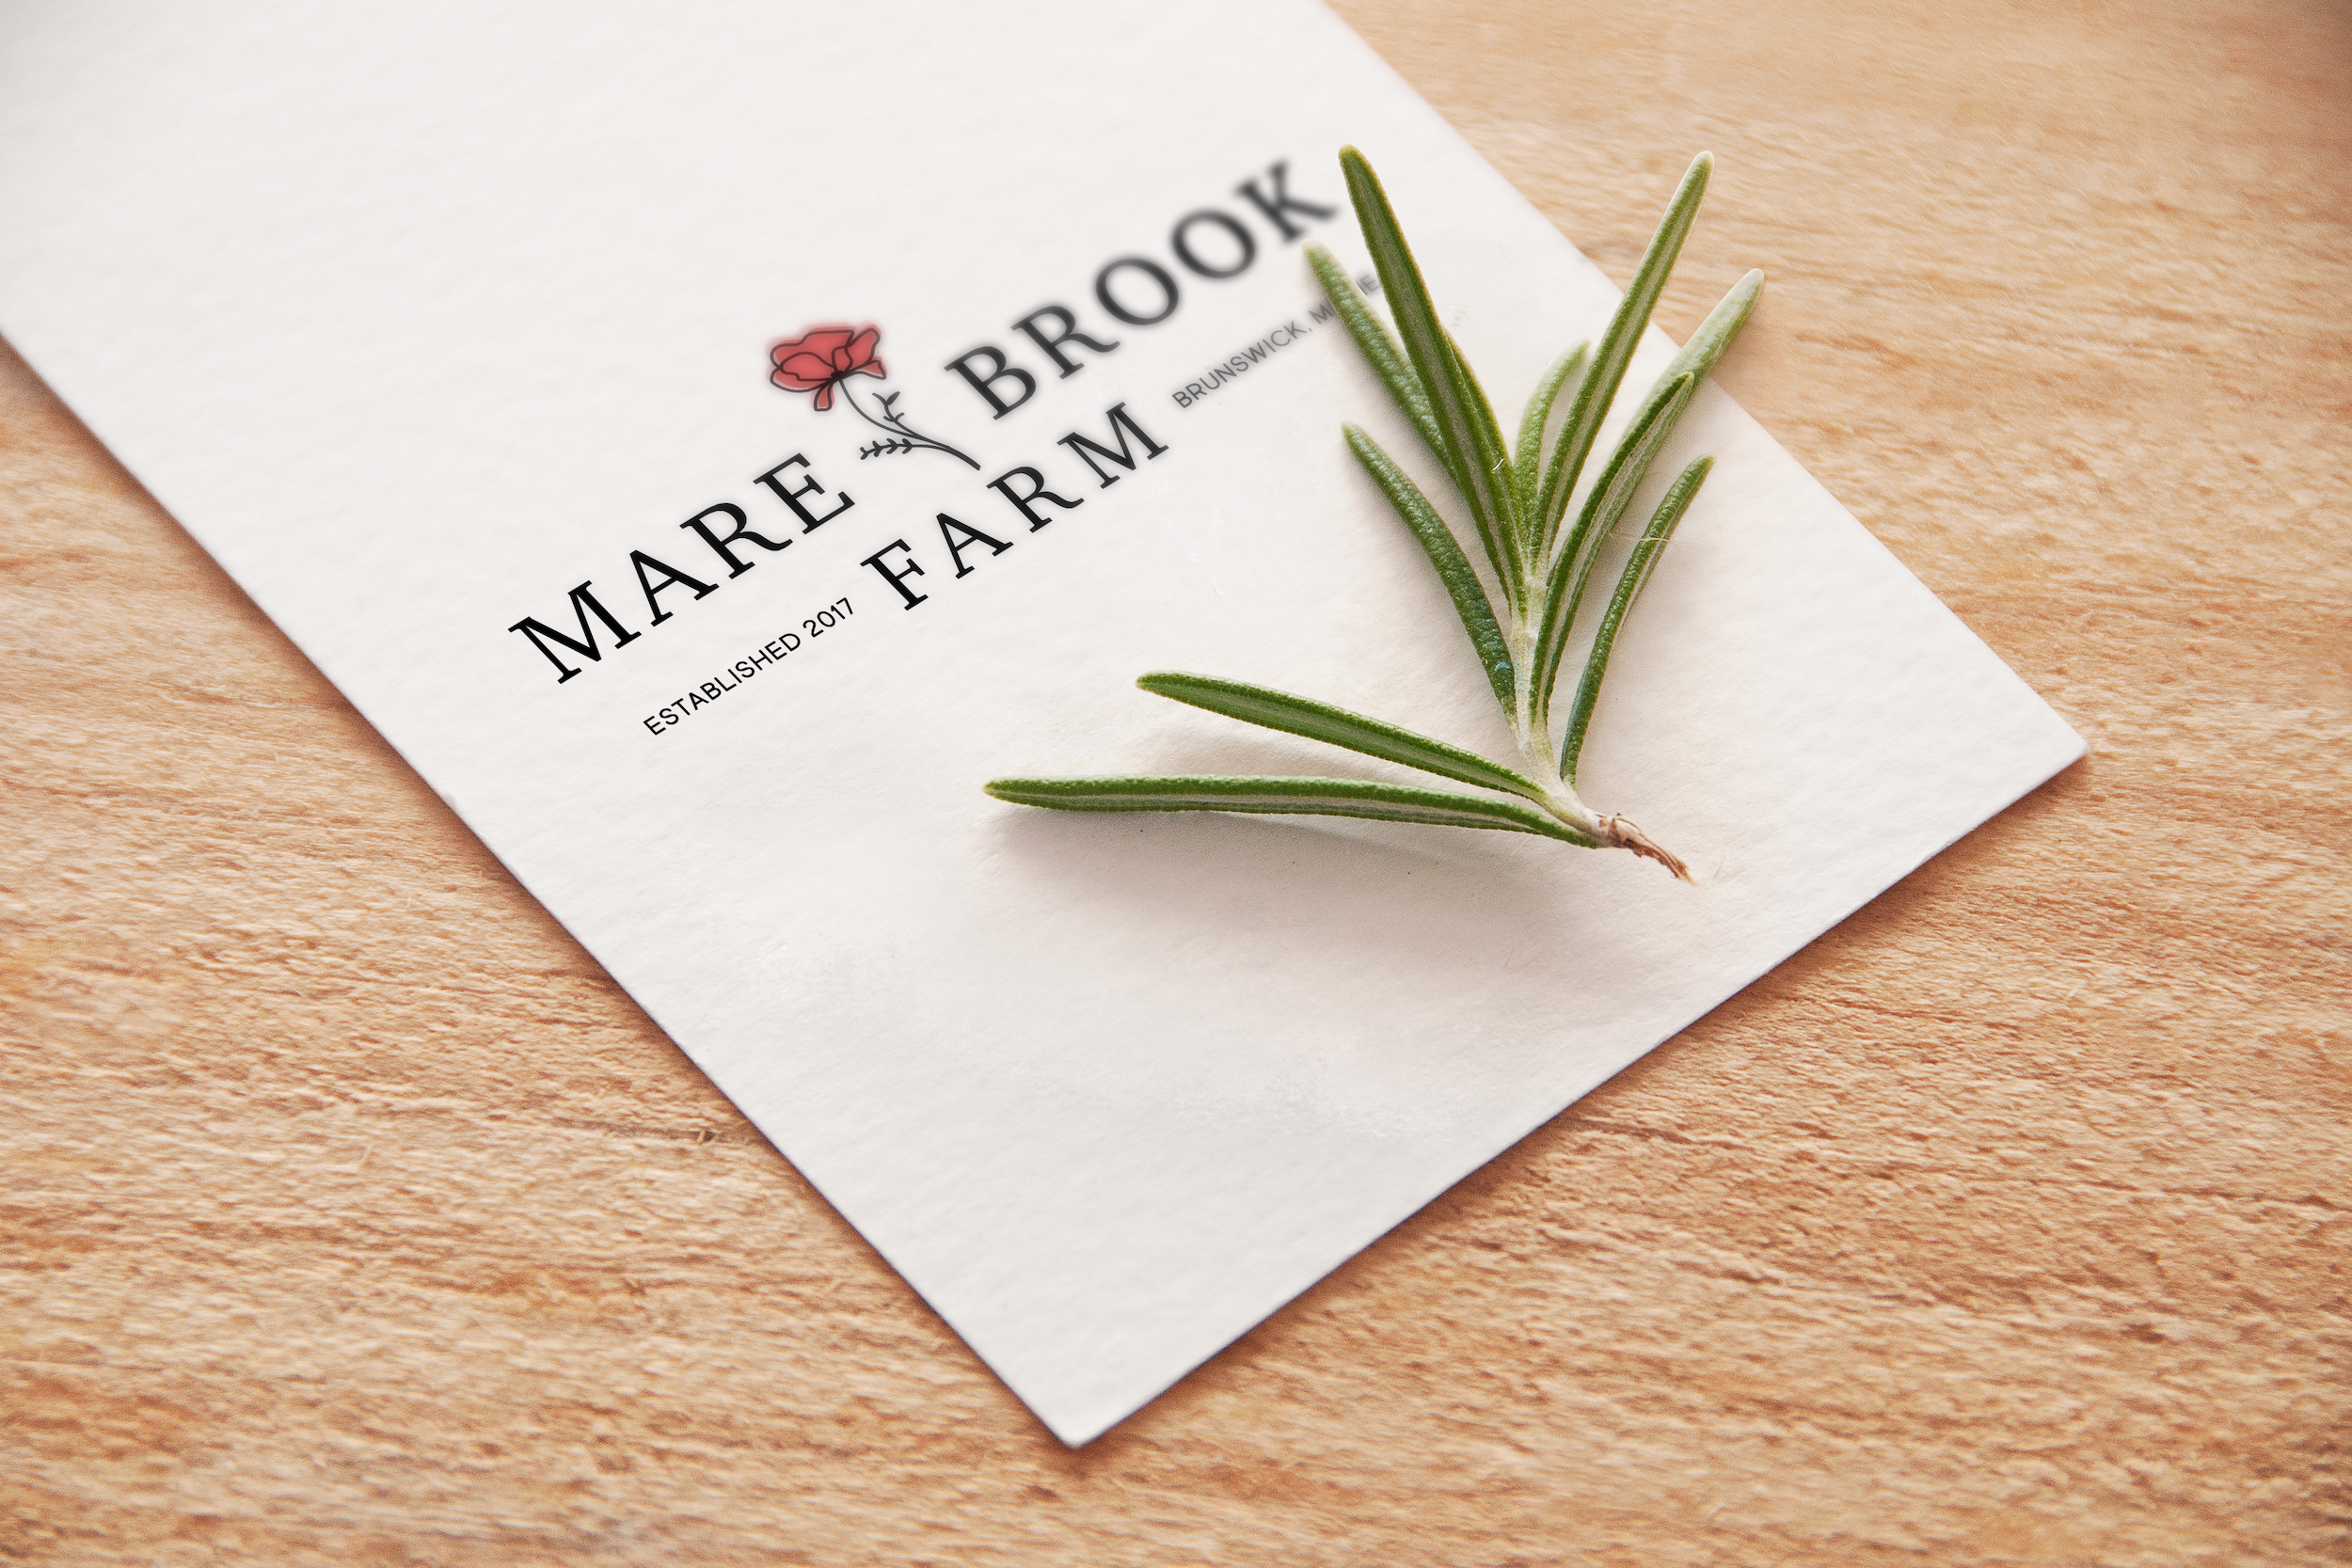 Mare Brook Farm Herb Tag Mockup with Rosemary.png